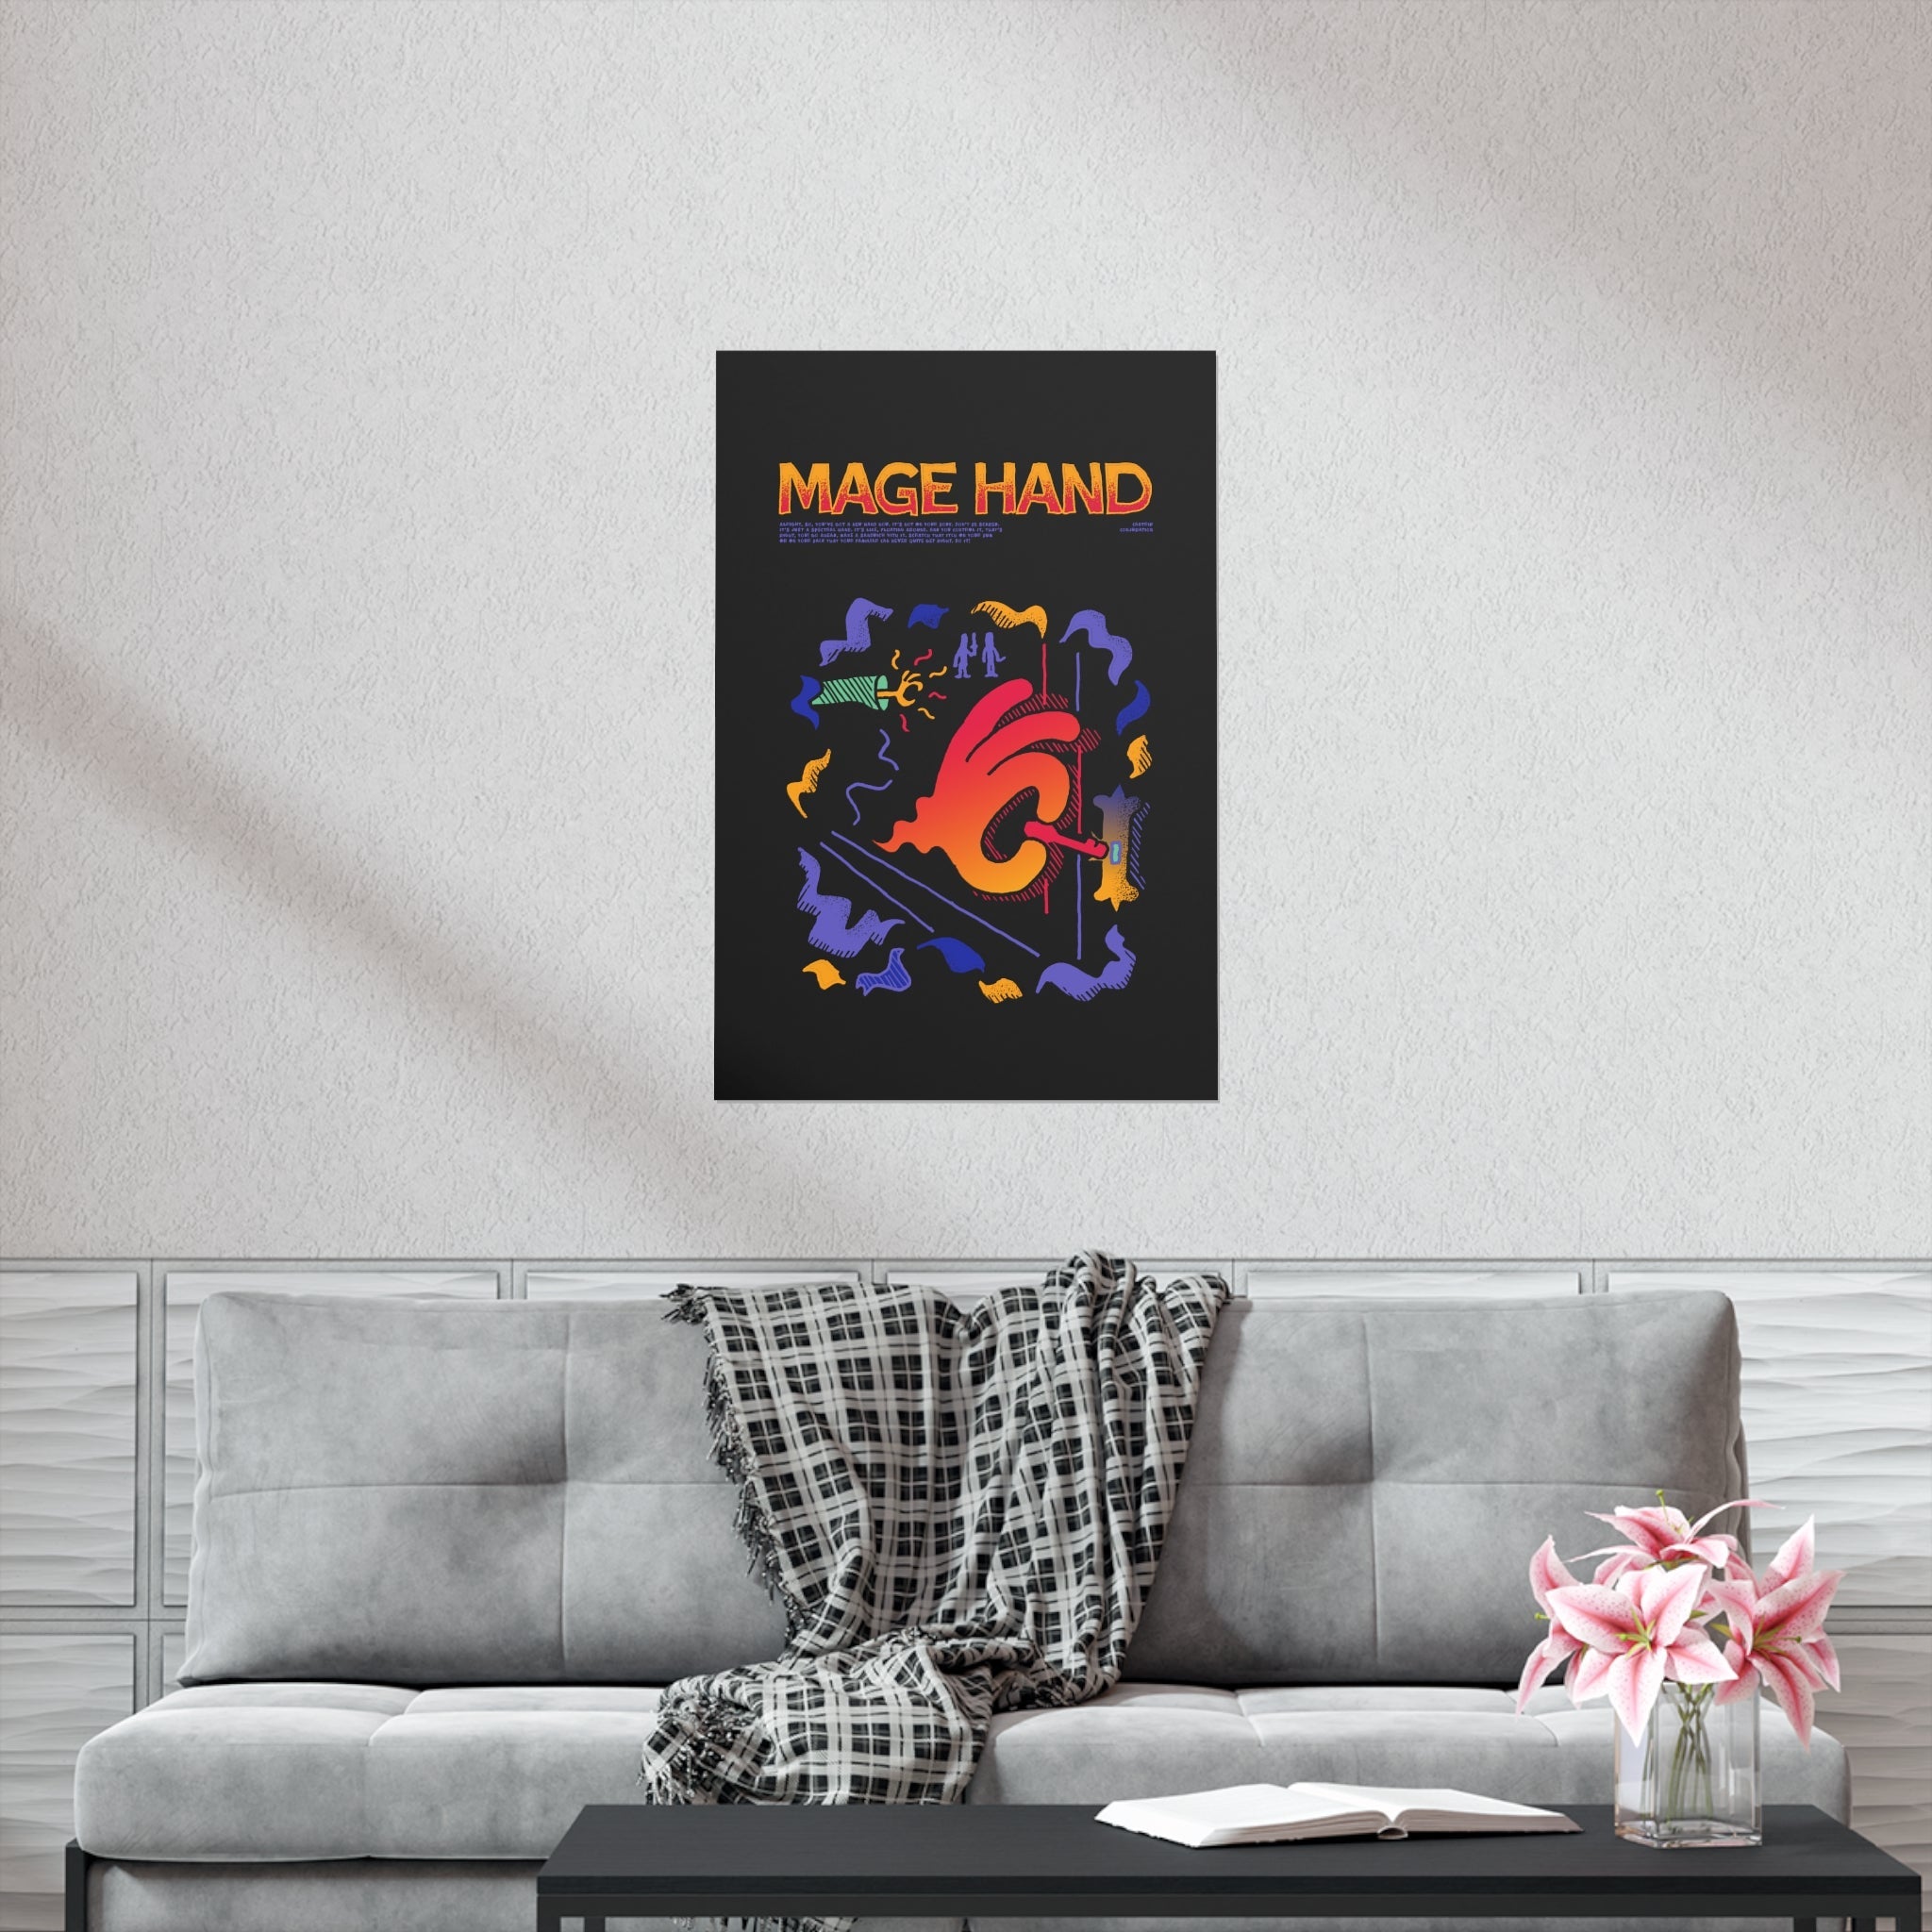 Mage Hand | Premium Matte Poster - Poster - Ace of Gnomes - 22790640600770510064